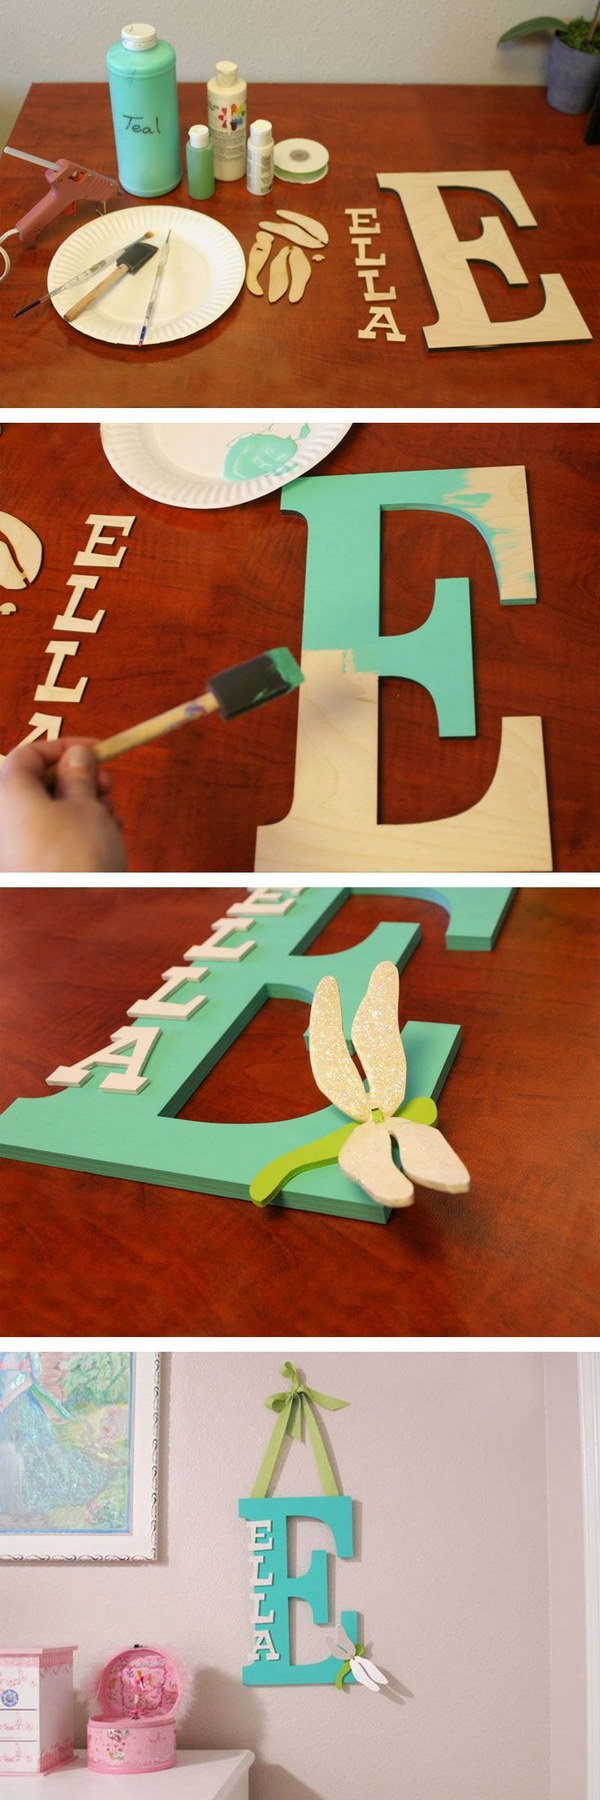 Painted Wooden Letter. This painted wooden letter is super easy to make and looks perfect when haning in kid's room!